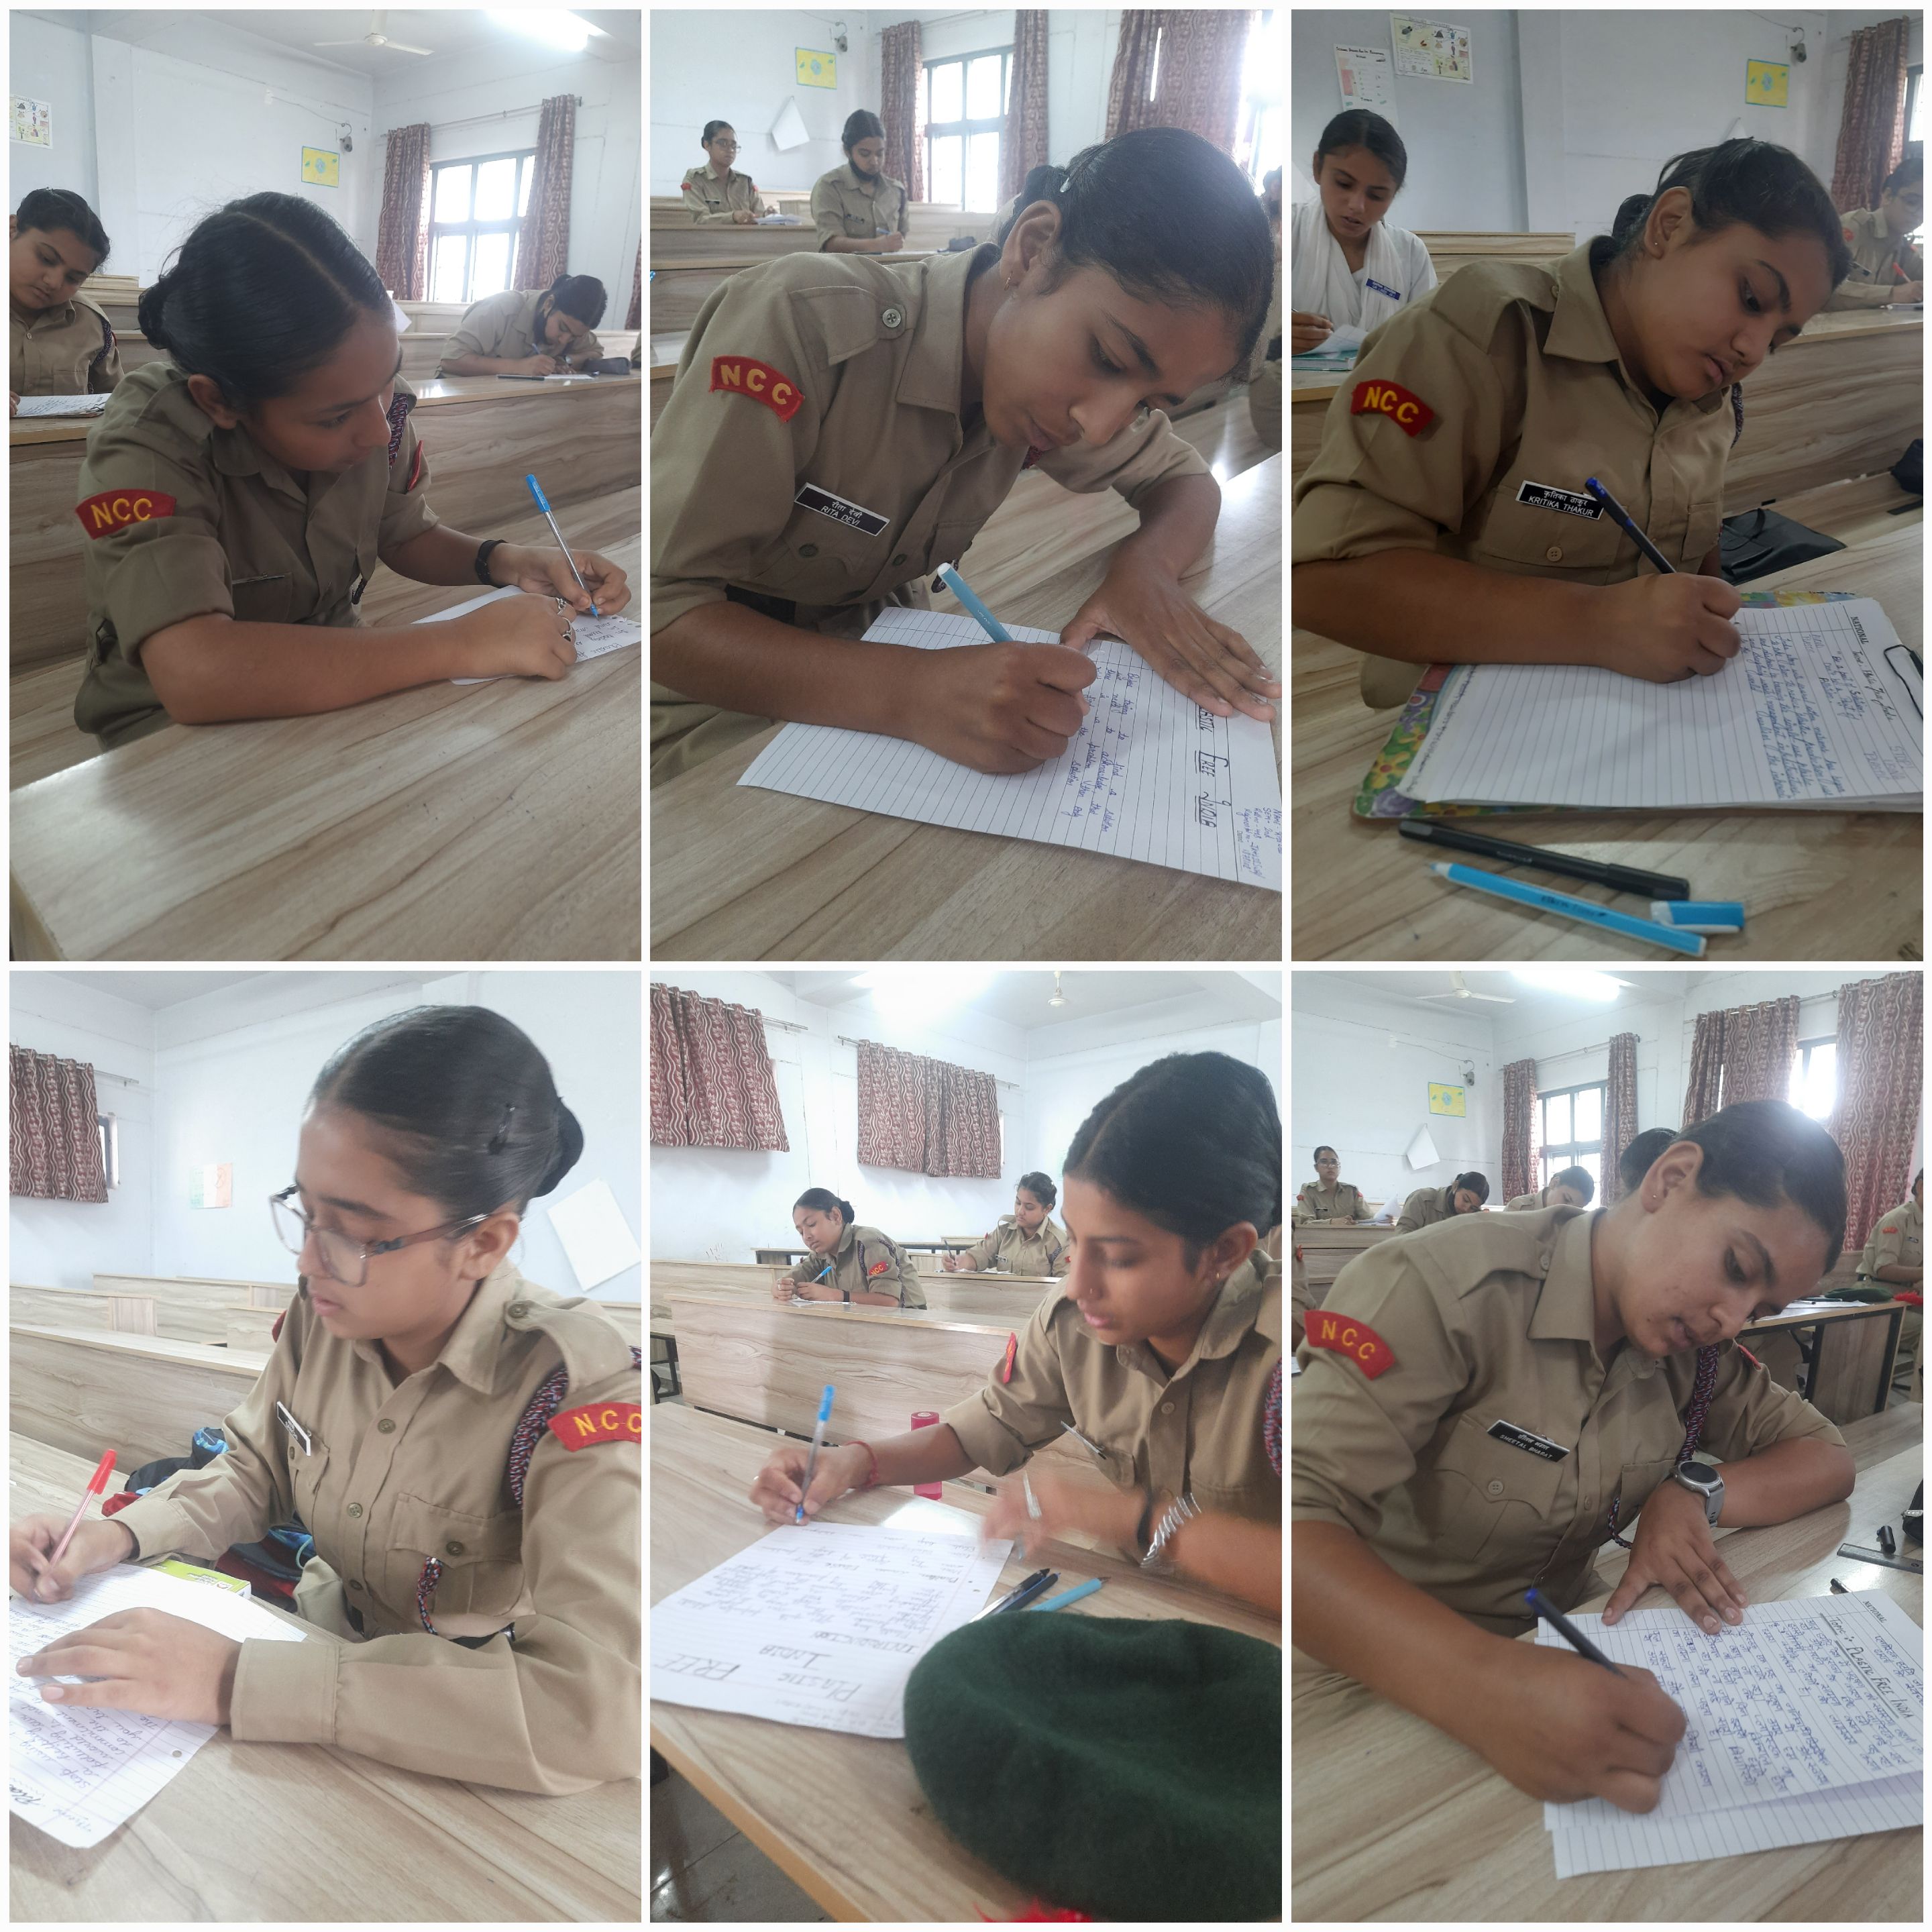 NCC Unit of GCW Udhampur organised Essay Writing competition under Mission Life for Environment